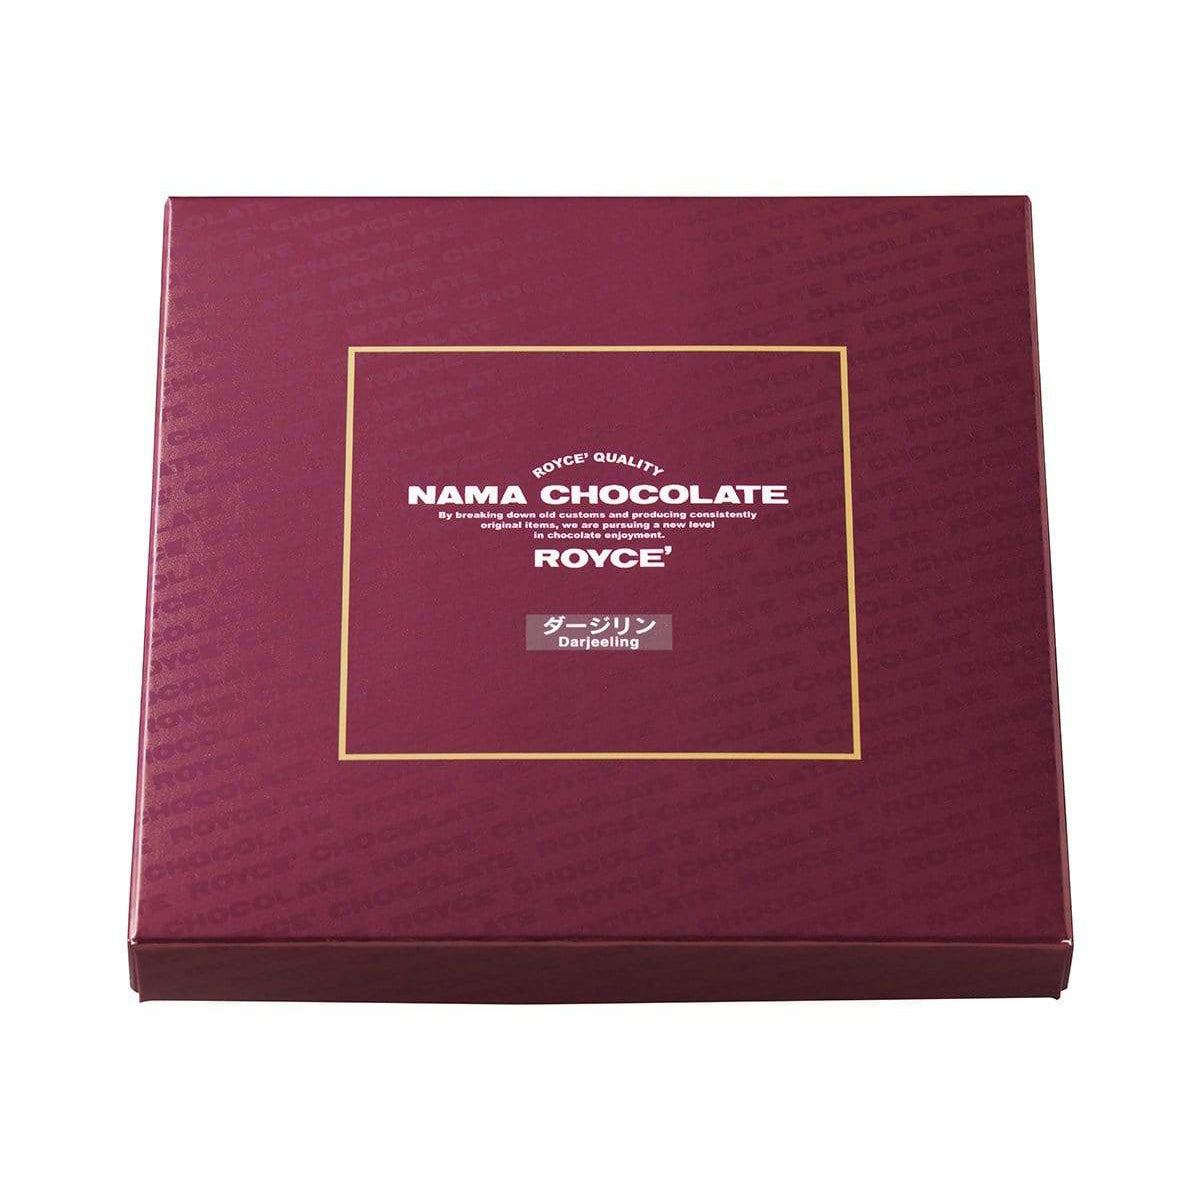 ROYCE' Chocolate - Nama Chocolate "Darjeeling" - Image shows a maroon box. White text inside golden square says ROYCE' Quality Nama Chocolate By breaking down old customs and producing consistently original items, we are pursuing a new level in chocolate enjoyment. ROYCE' Darjeeling.